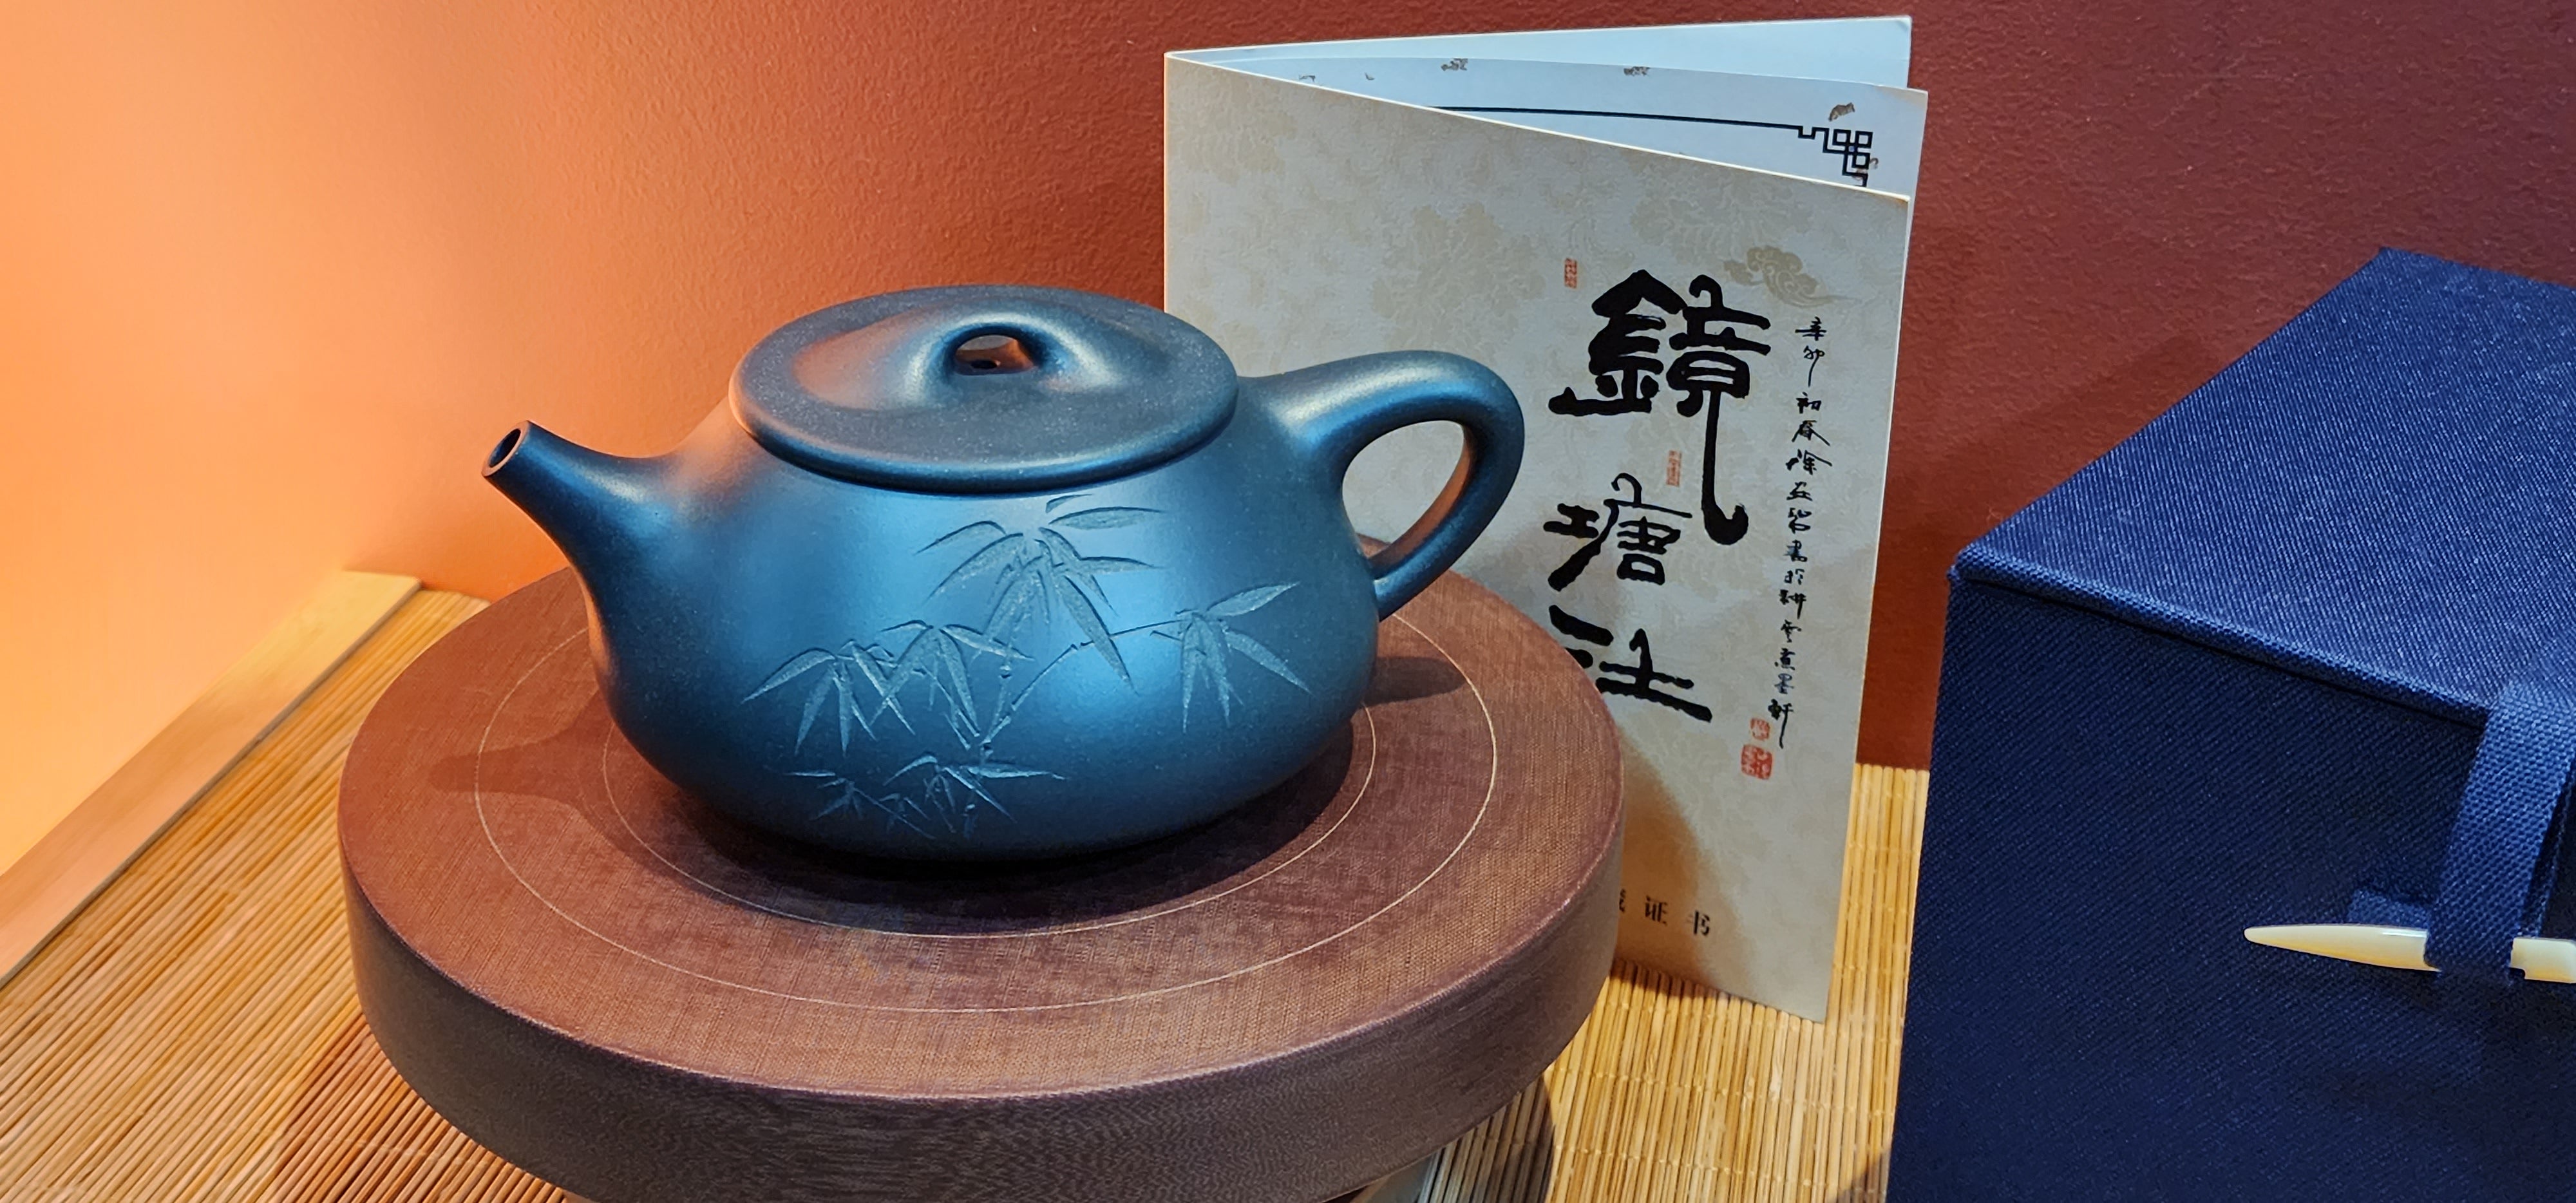 Special : Exquisite Ming Guo Lü Ni, JINGZHOU SHIPIAO Pot, 曹家 明国绿泥, 景舟石瓢款 made by L4 Assoc Master Artist Zhang Ke 助理工艺美术师, 张轲。- commissioned by our Singapore patron in November 2022